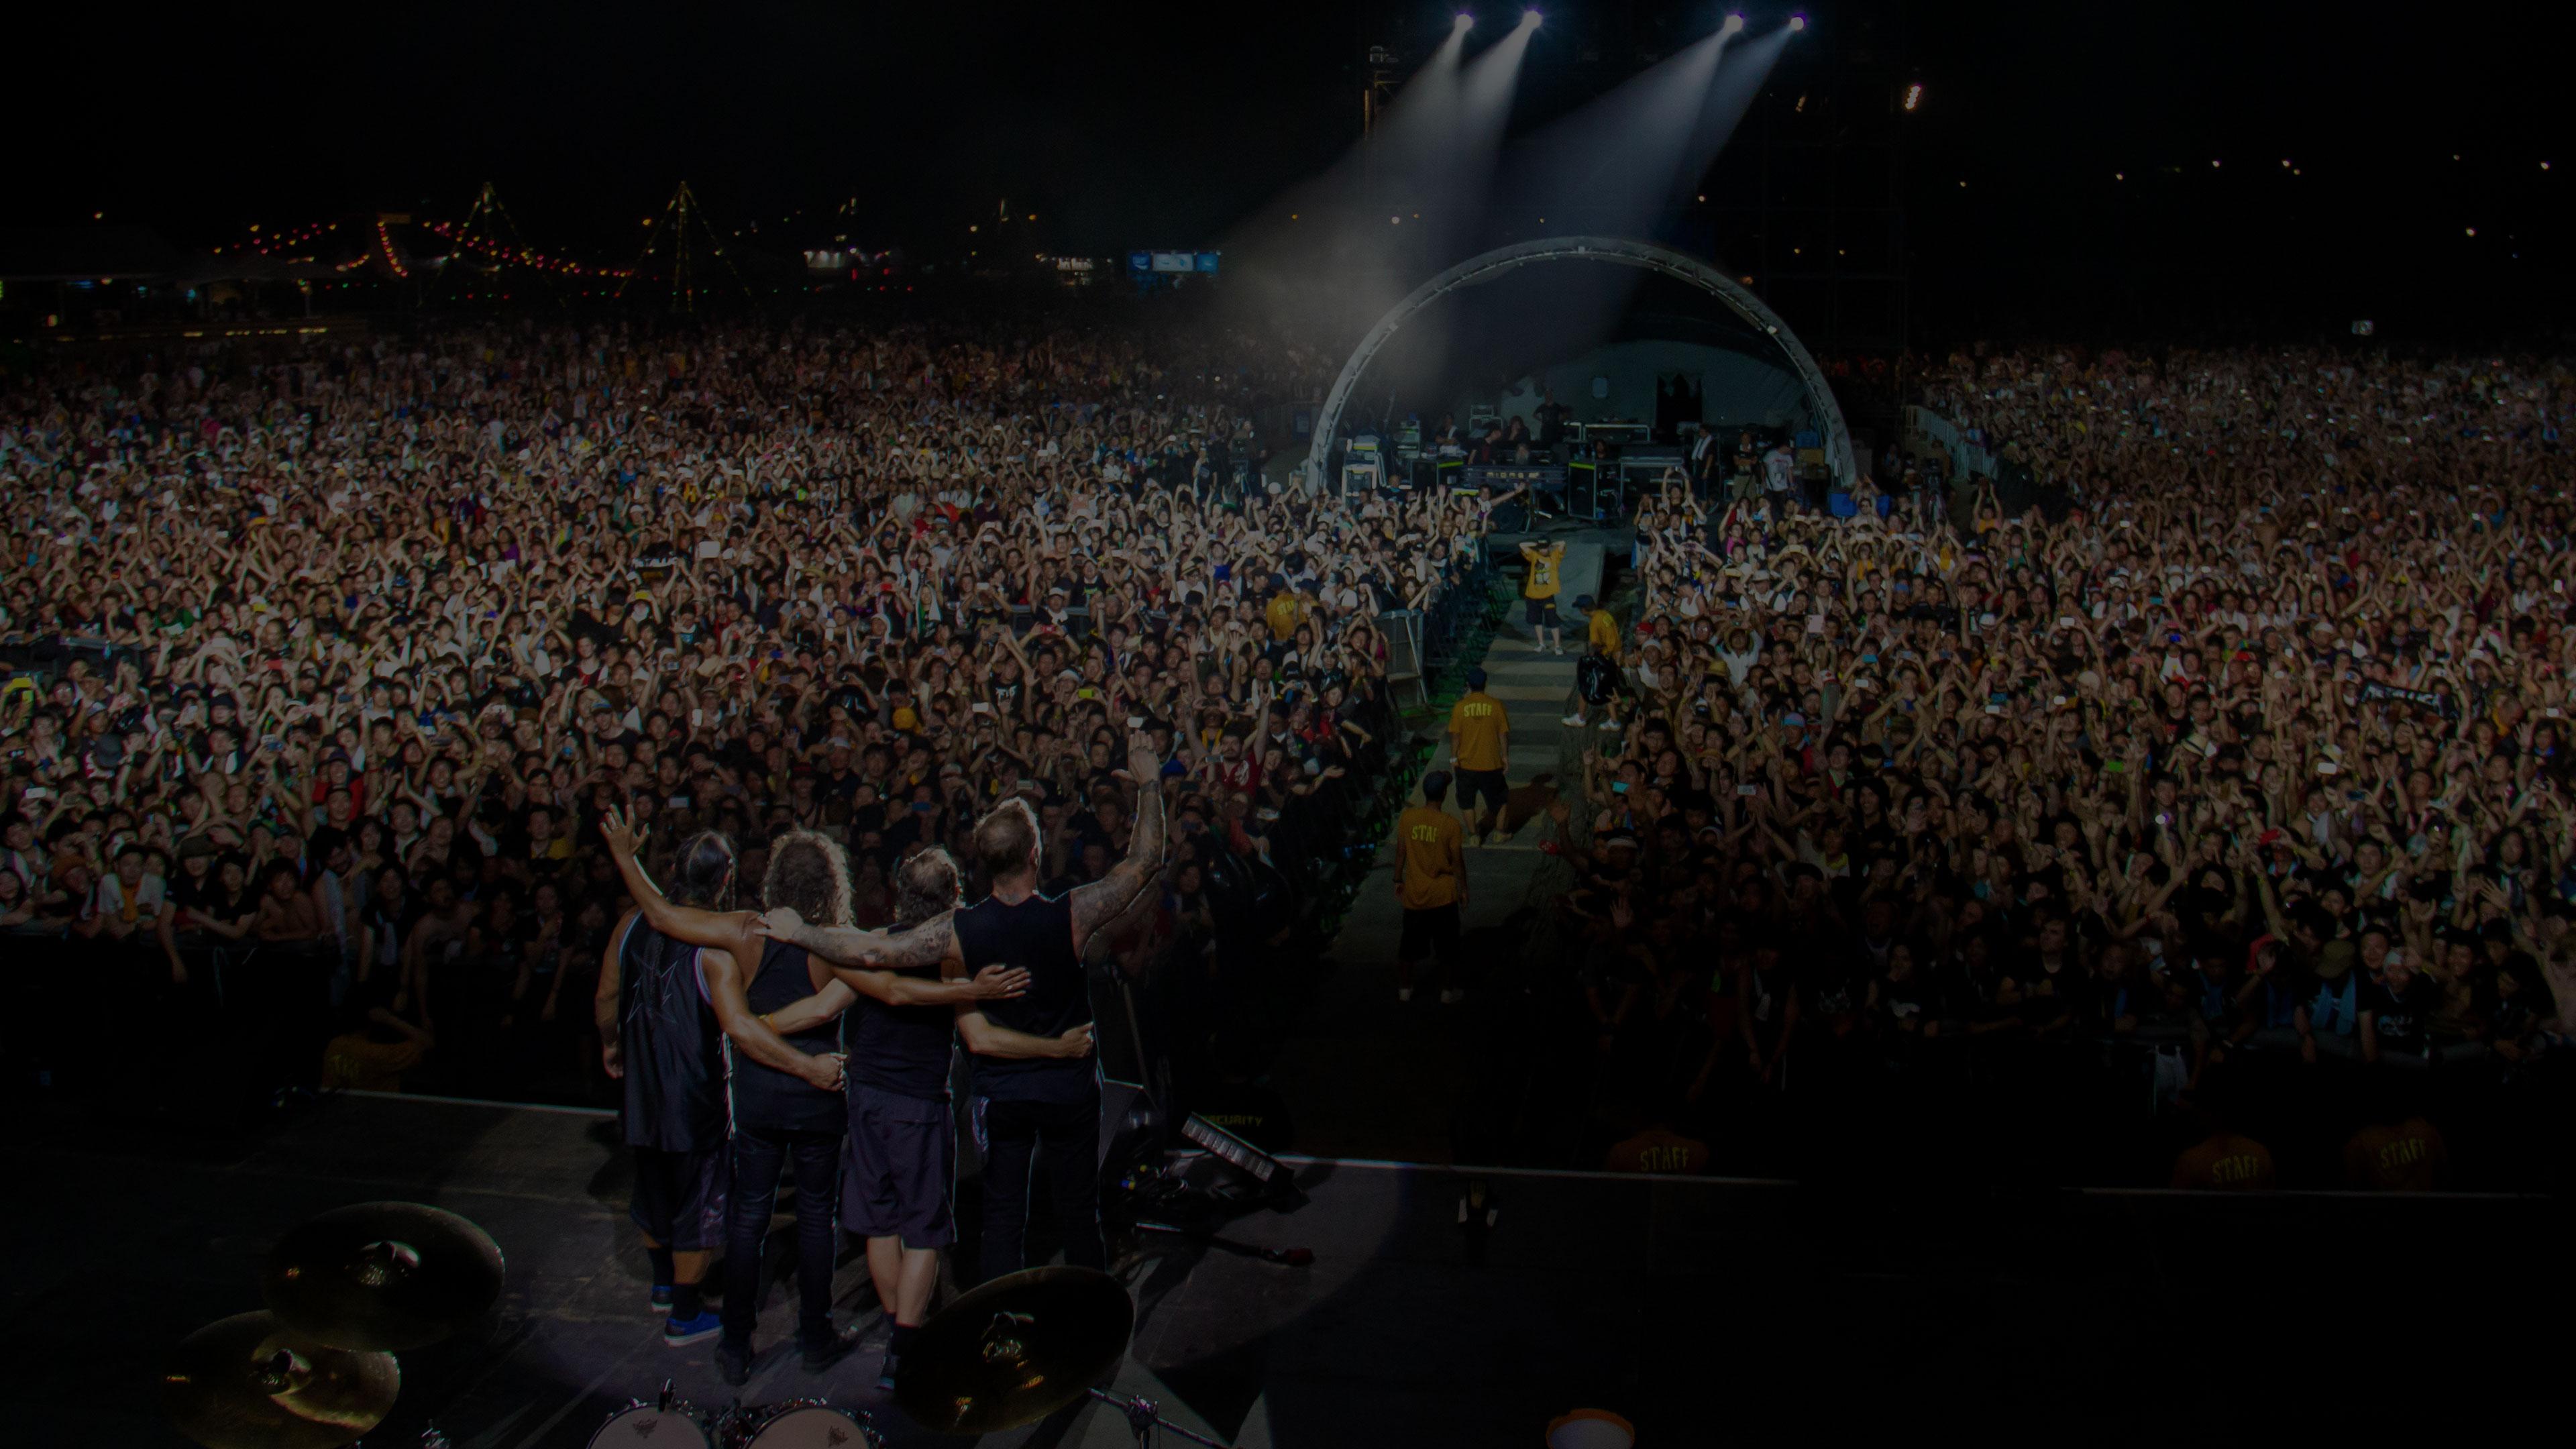 Banner Image for the photo gallery from the gig in Osaka, Japan shot on August 11, 2013